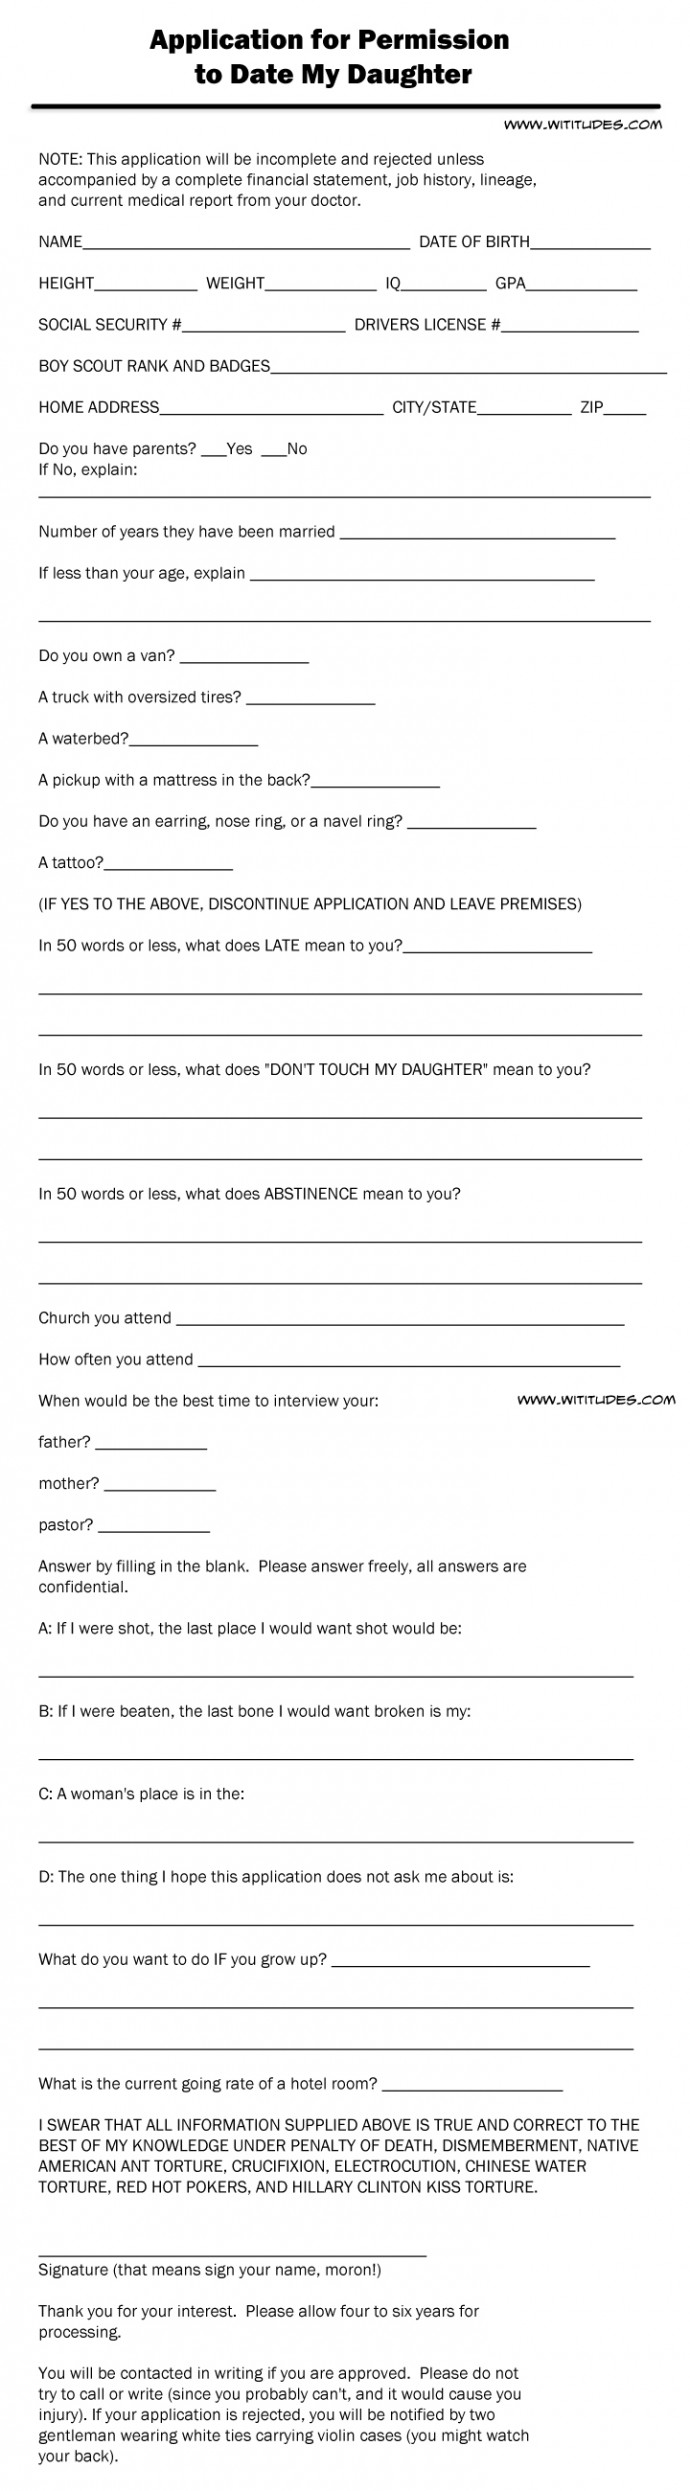 Application For Permission To Date My Daughter Form Wititudes